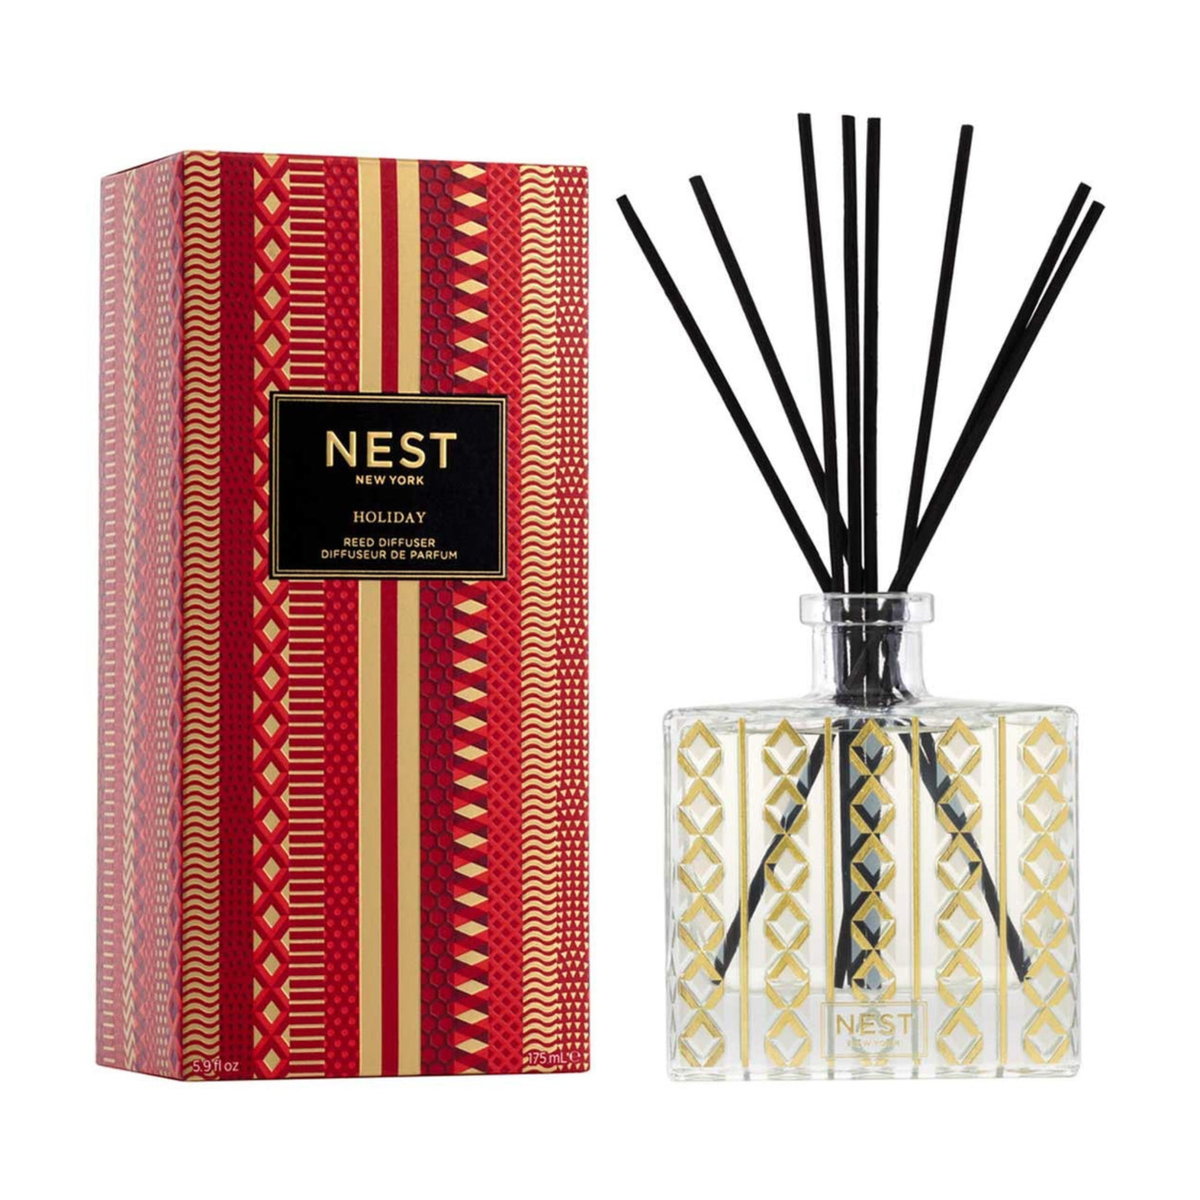 Product Image of Nest New York Holiday Reed Diffuser with Box